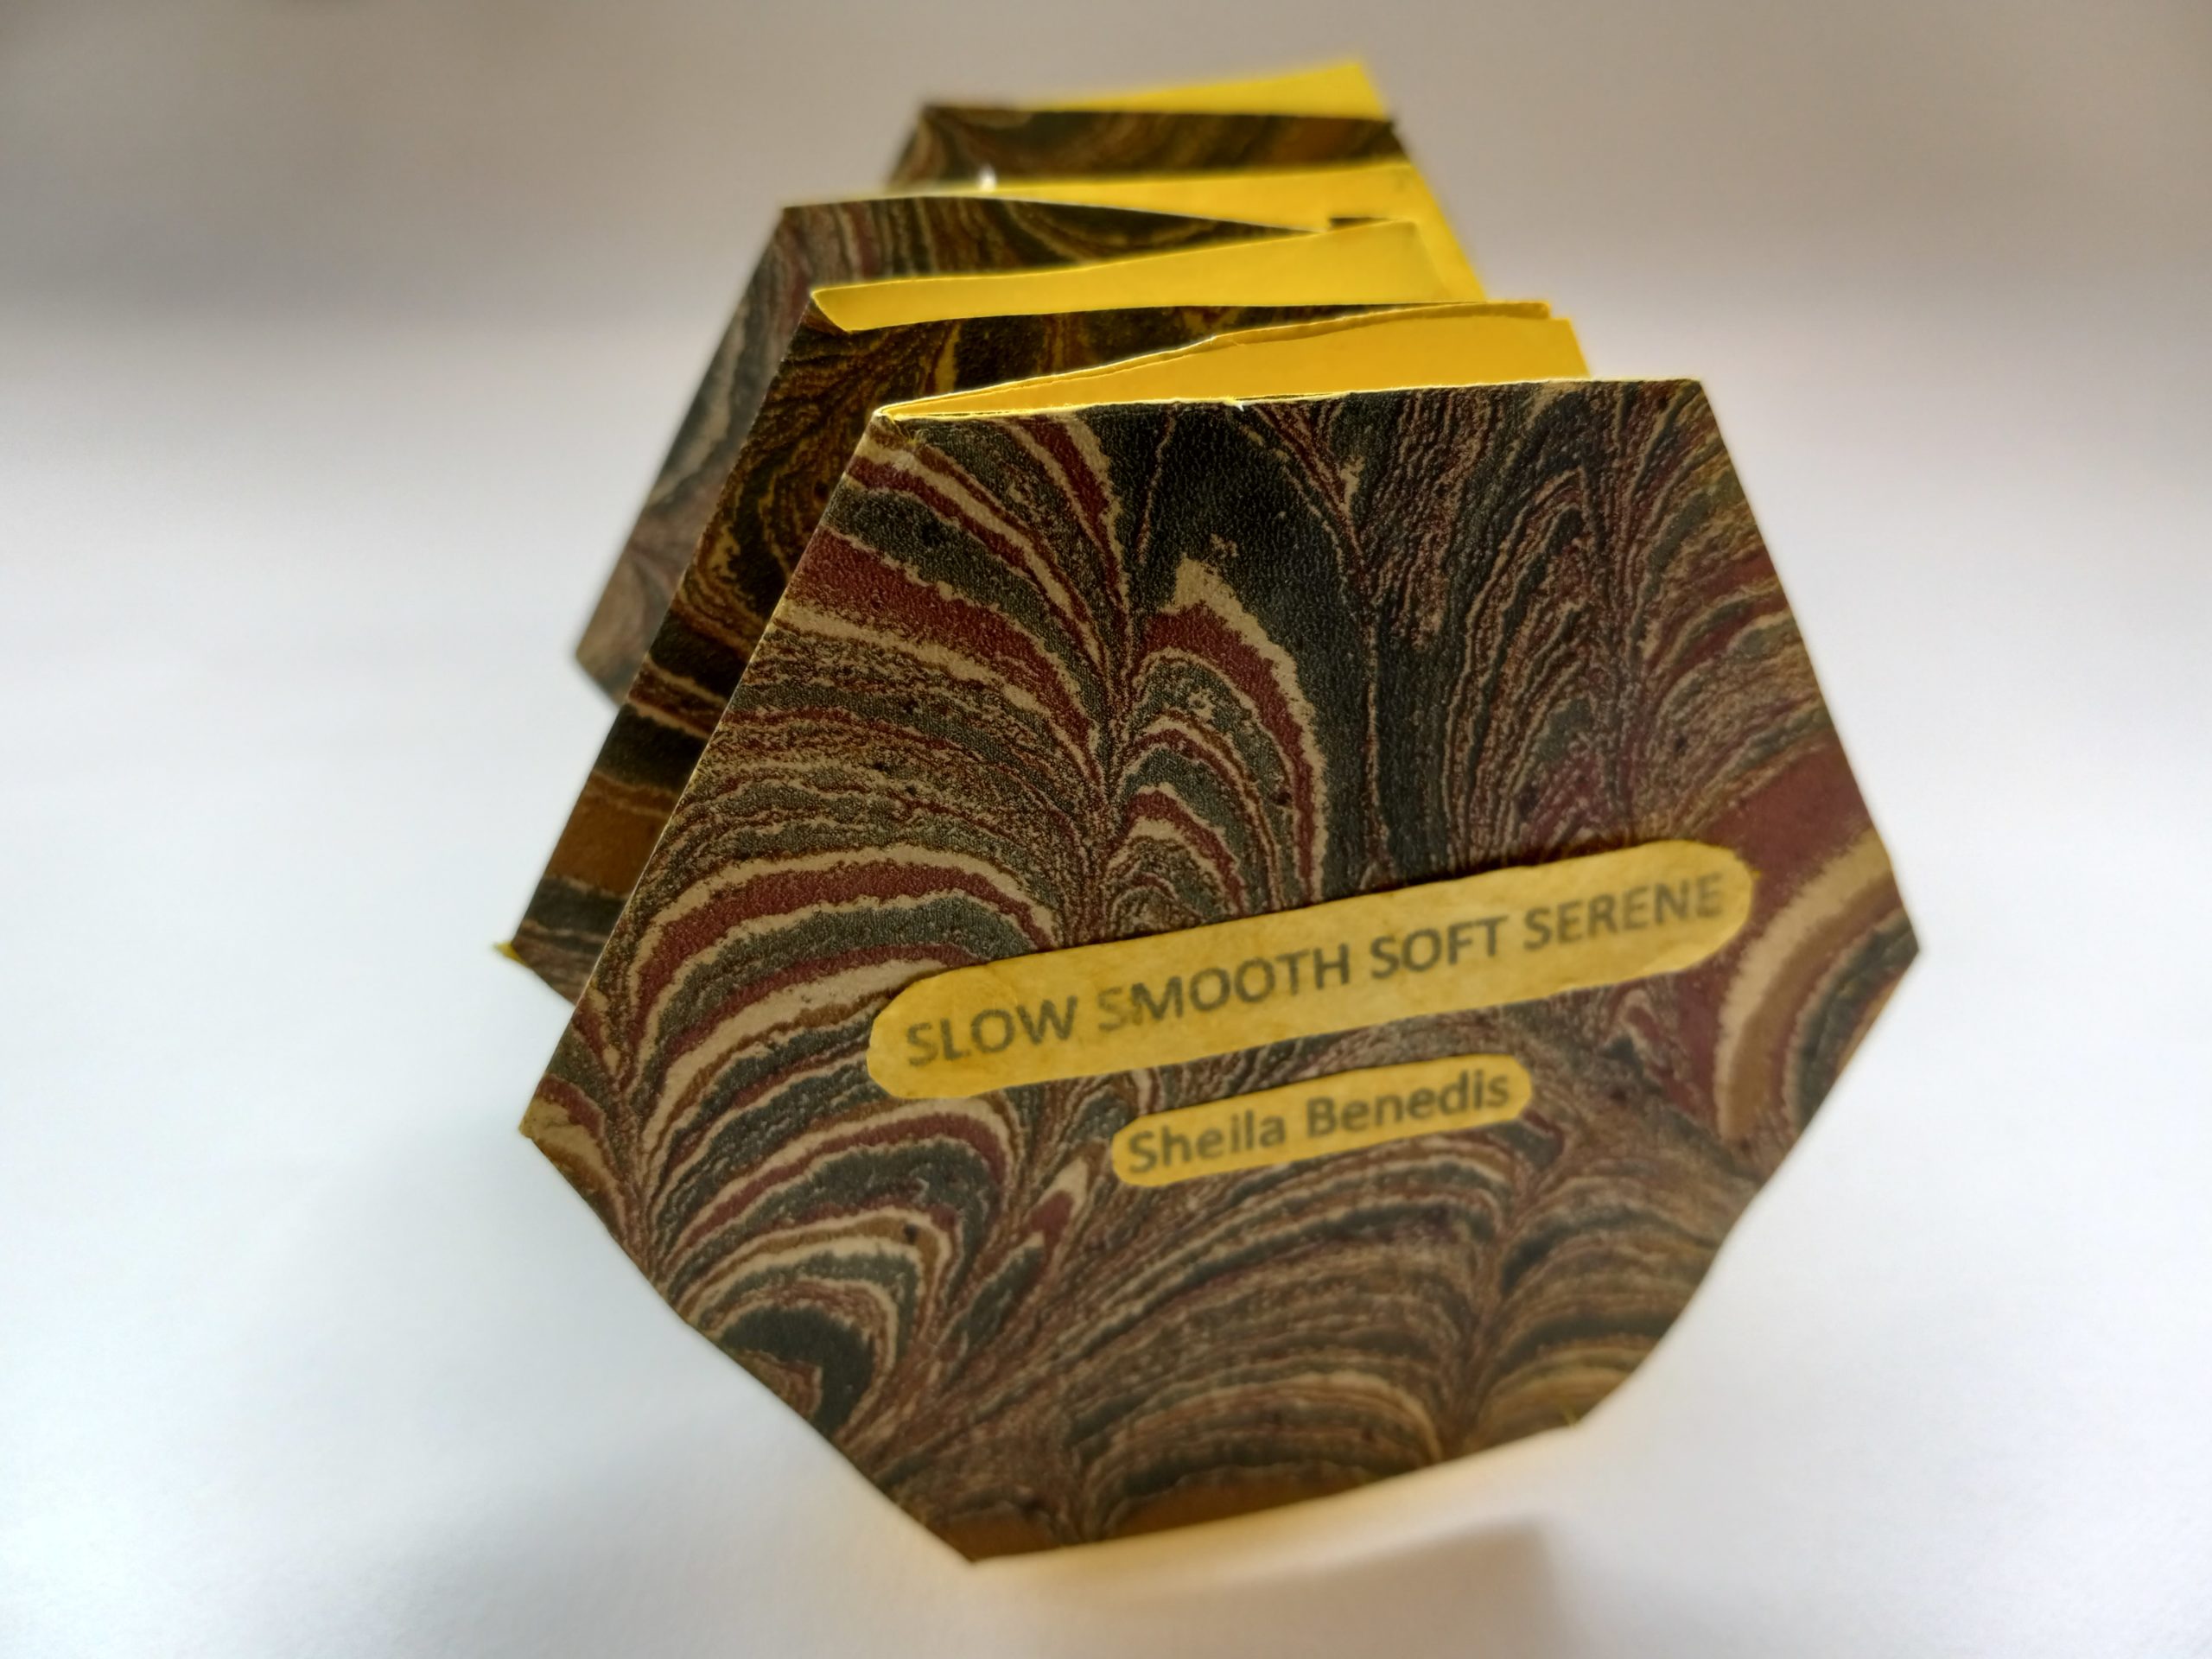 Accordion book in the shape of a hexagon